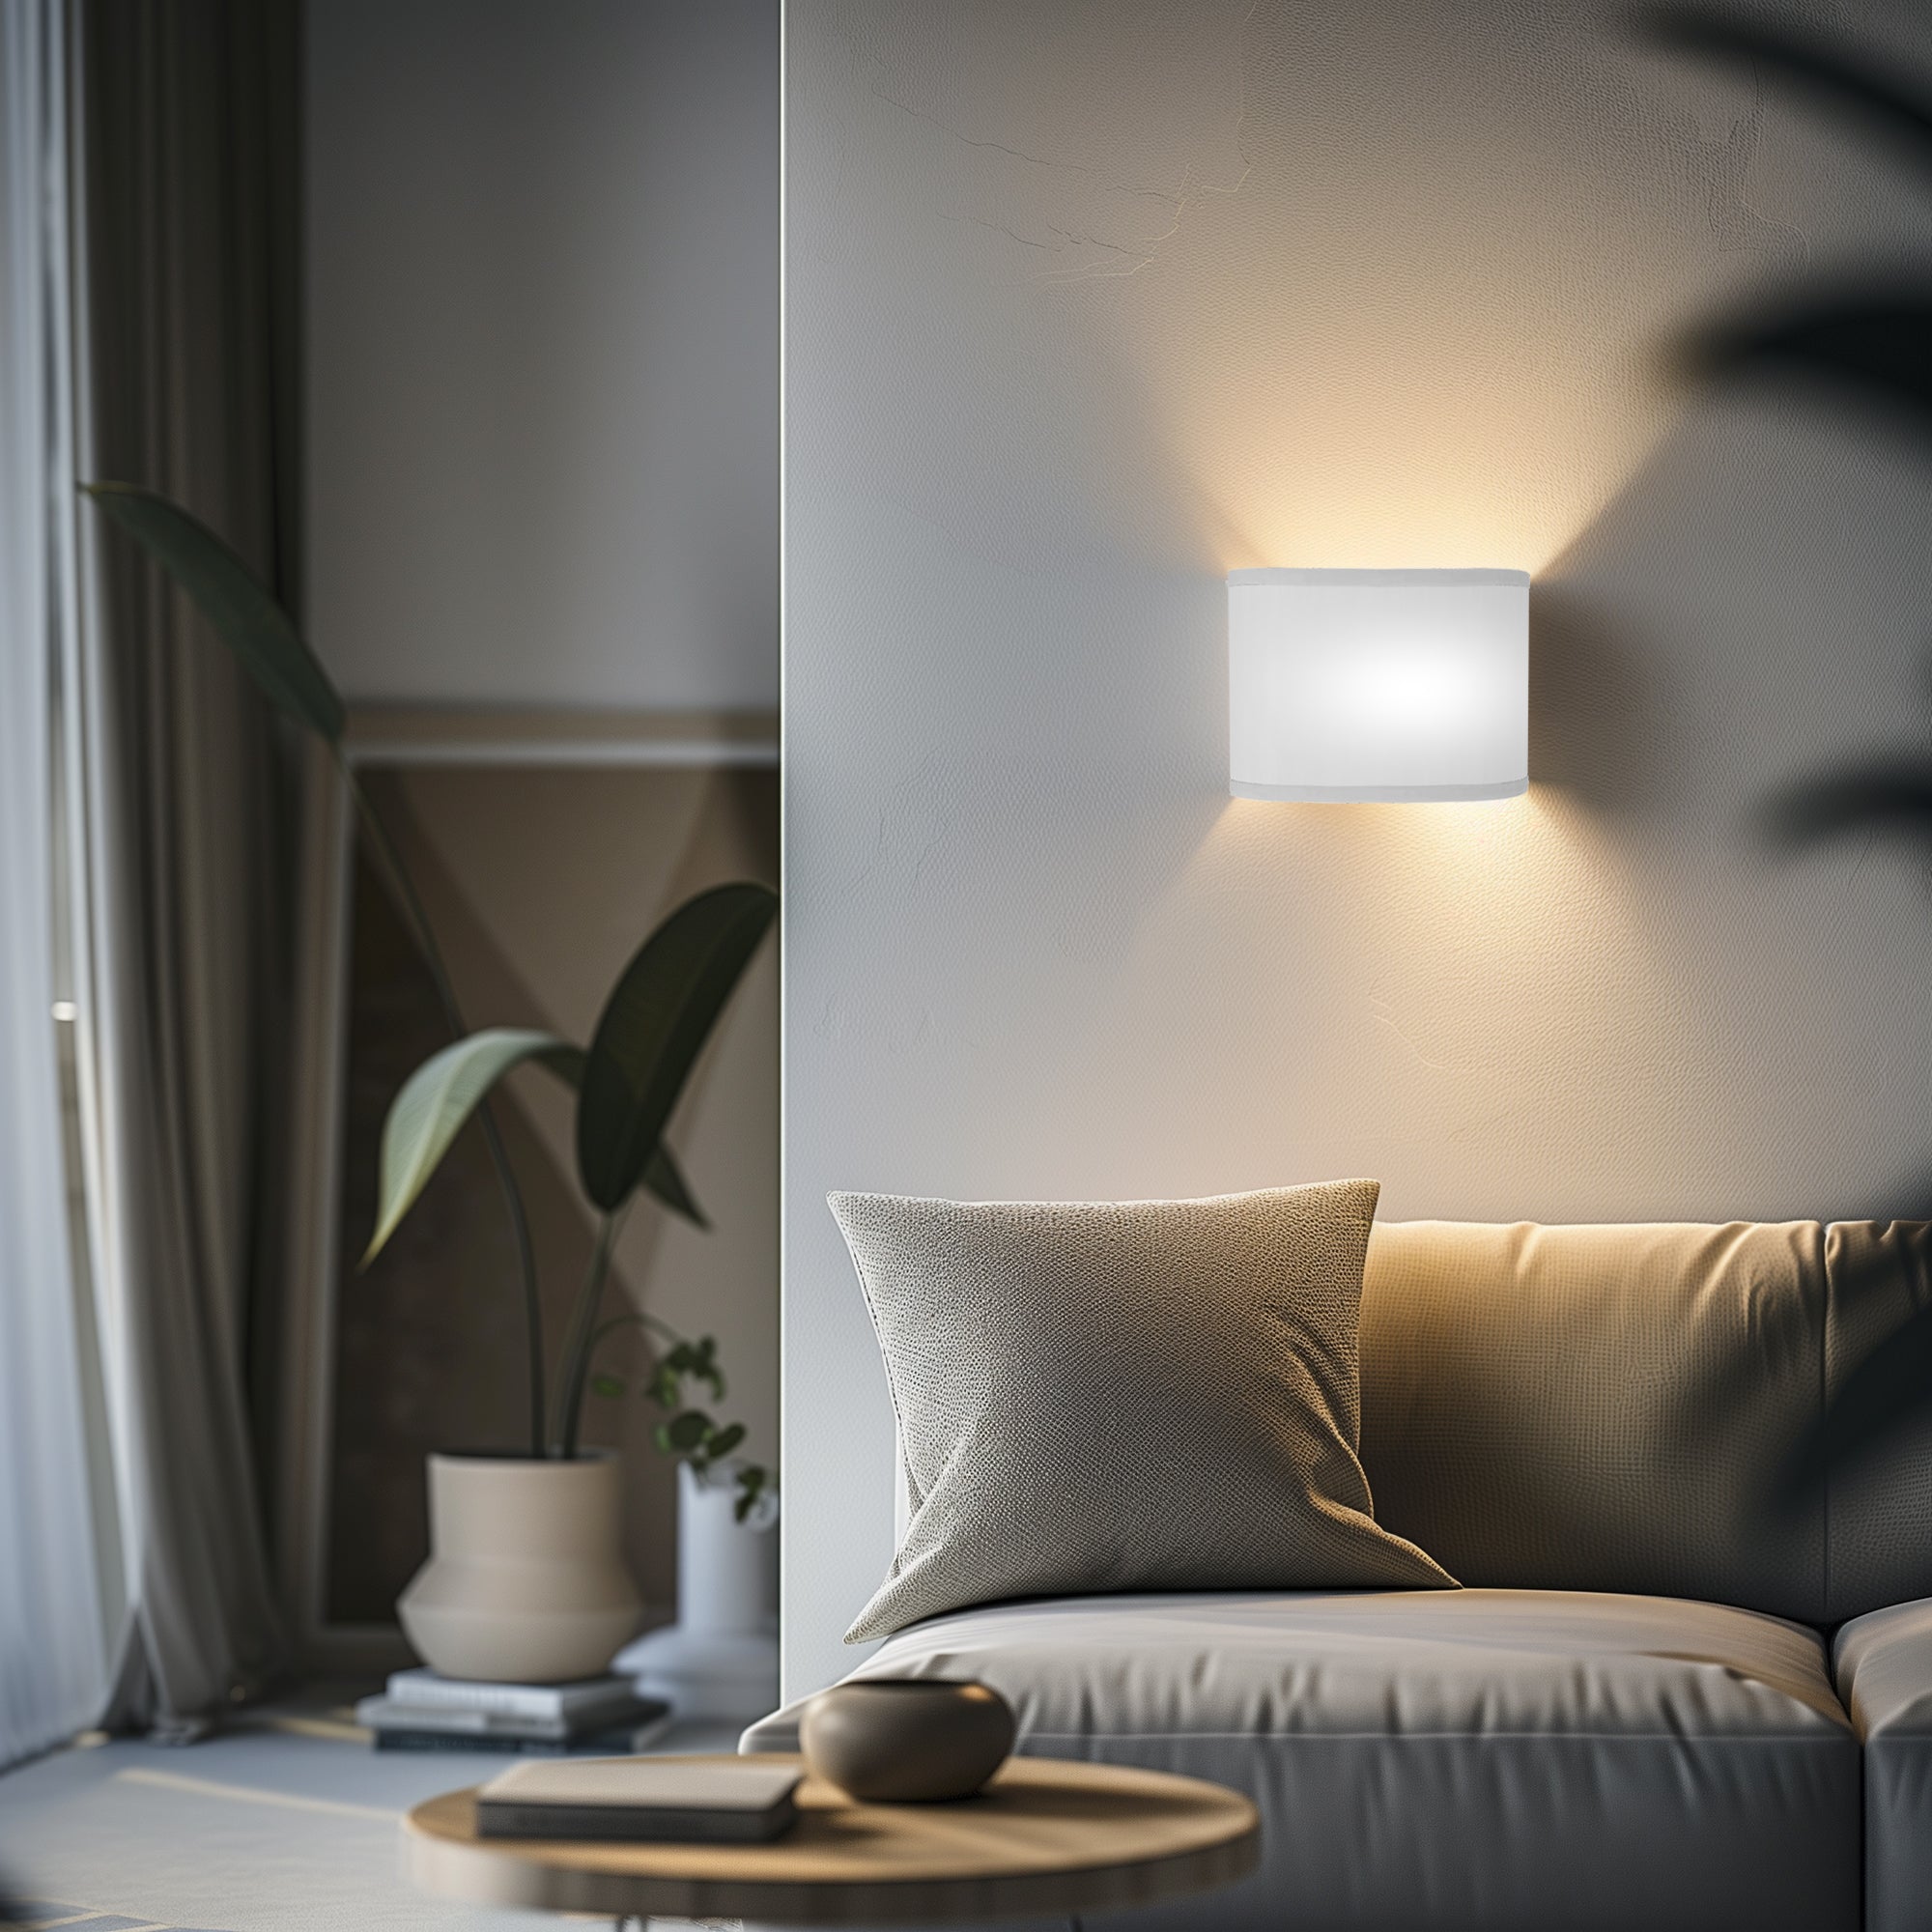 The Bryce Wall Sconce from Seascape Fixtures in a living room lifestyle photograph.